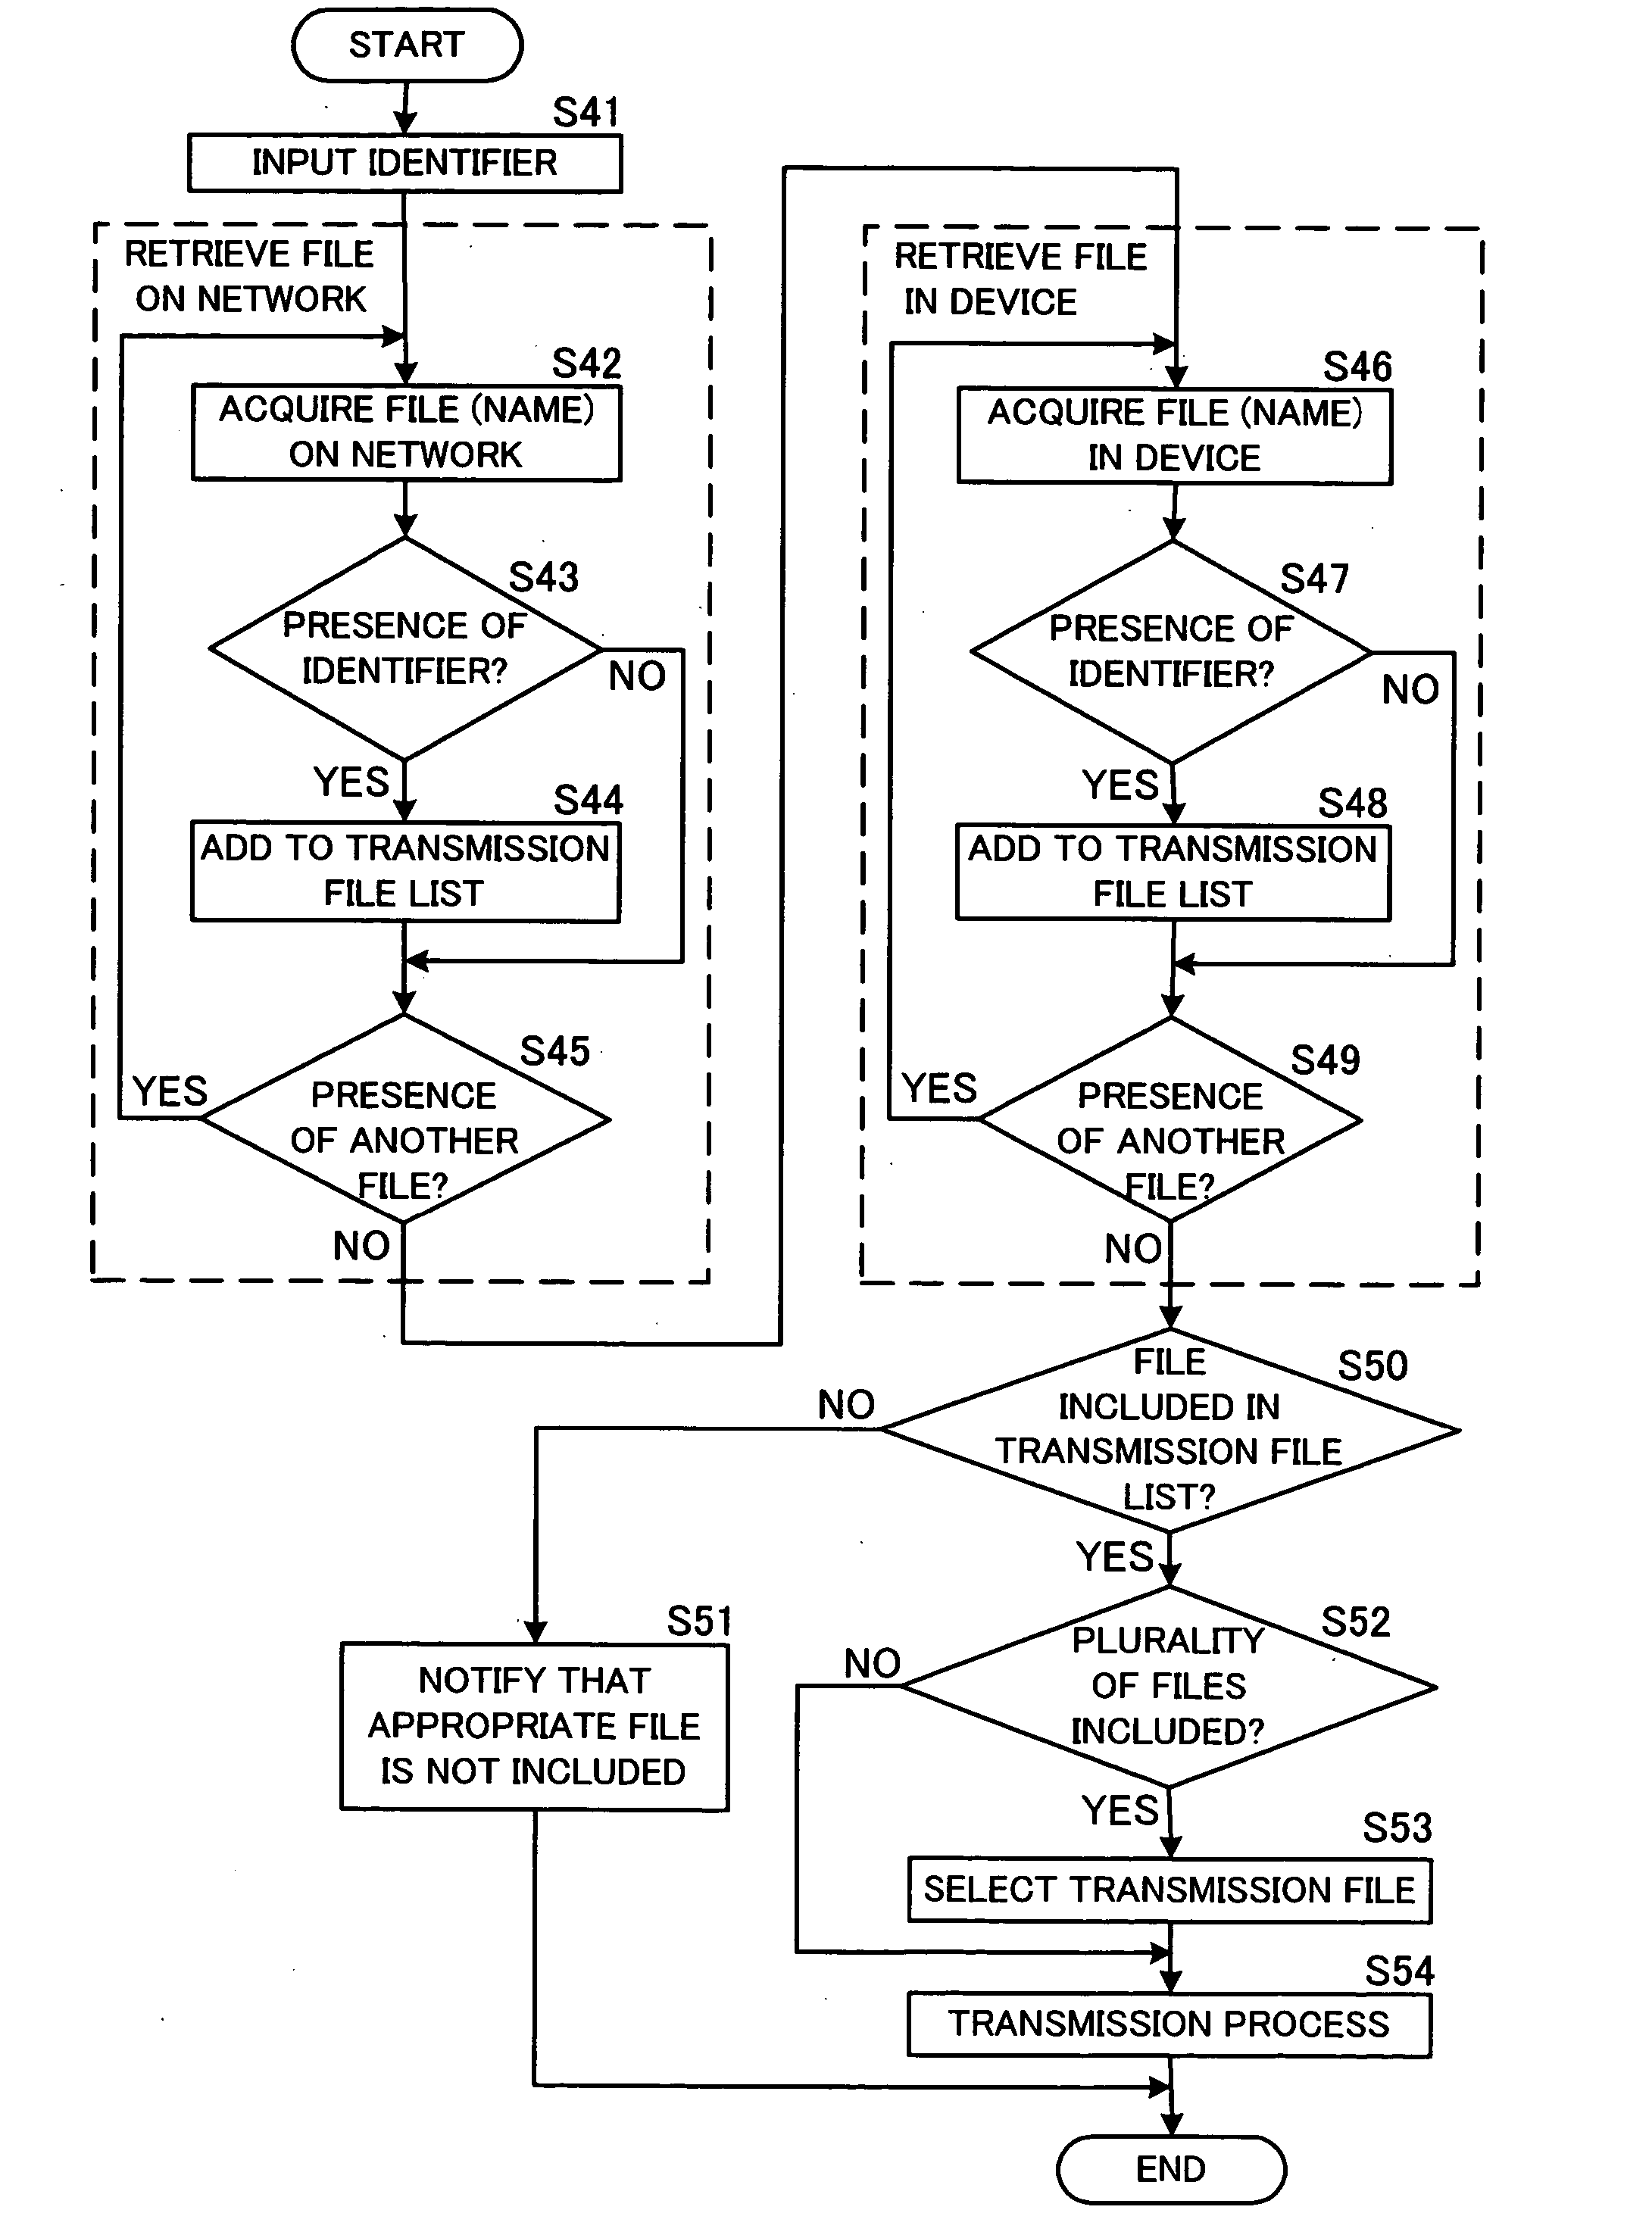 Communication device and data conversion device